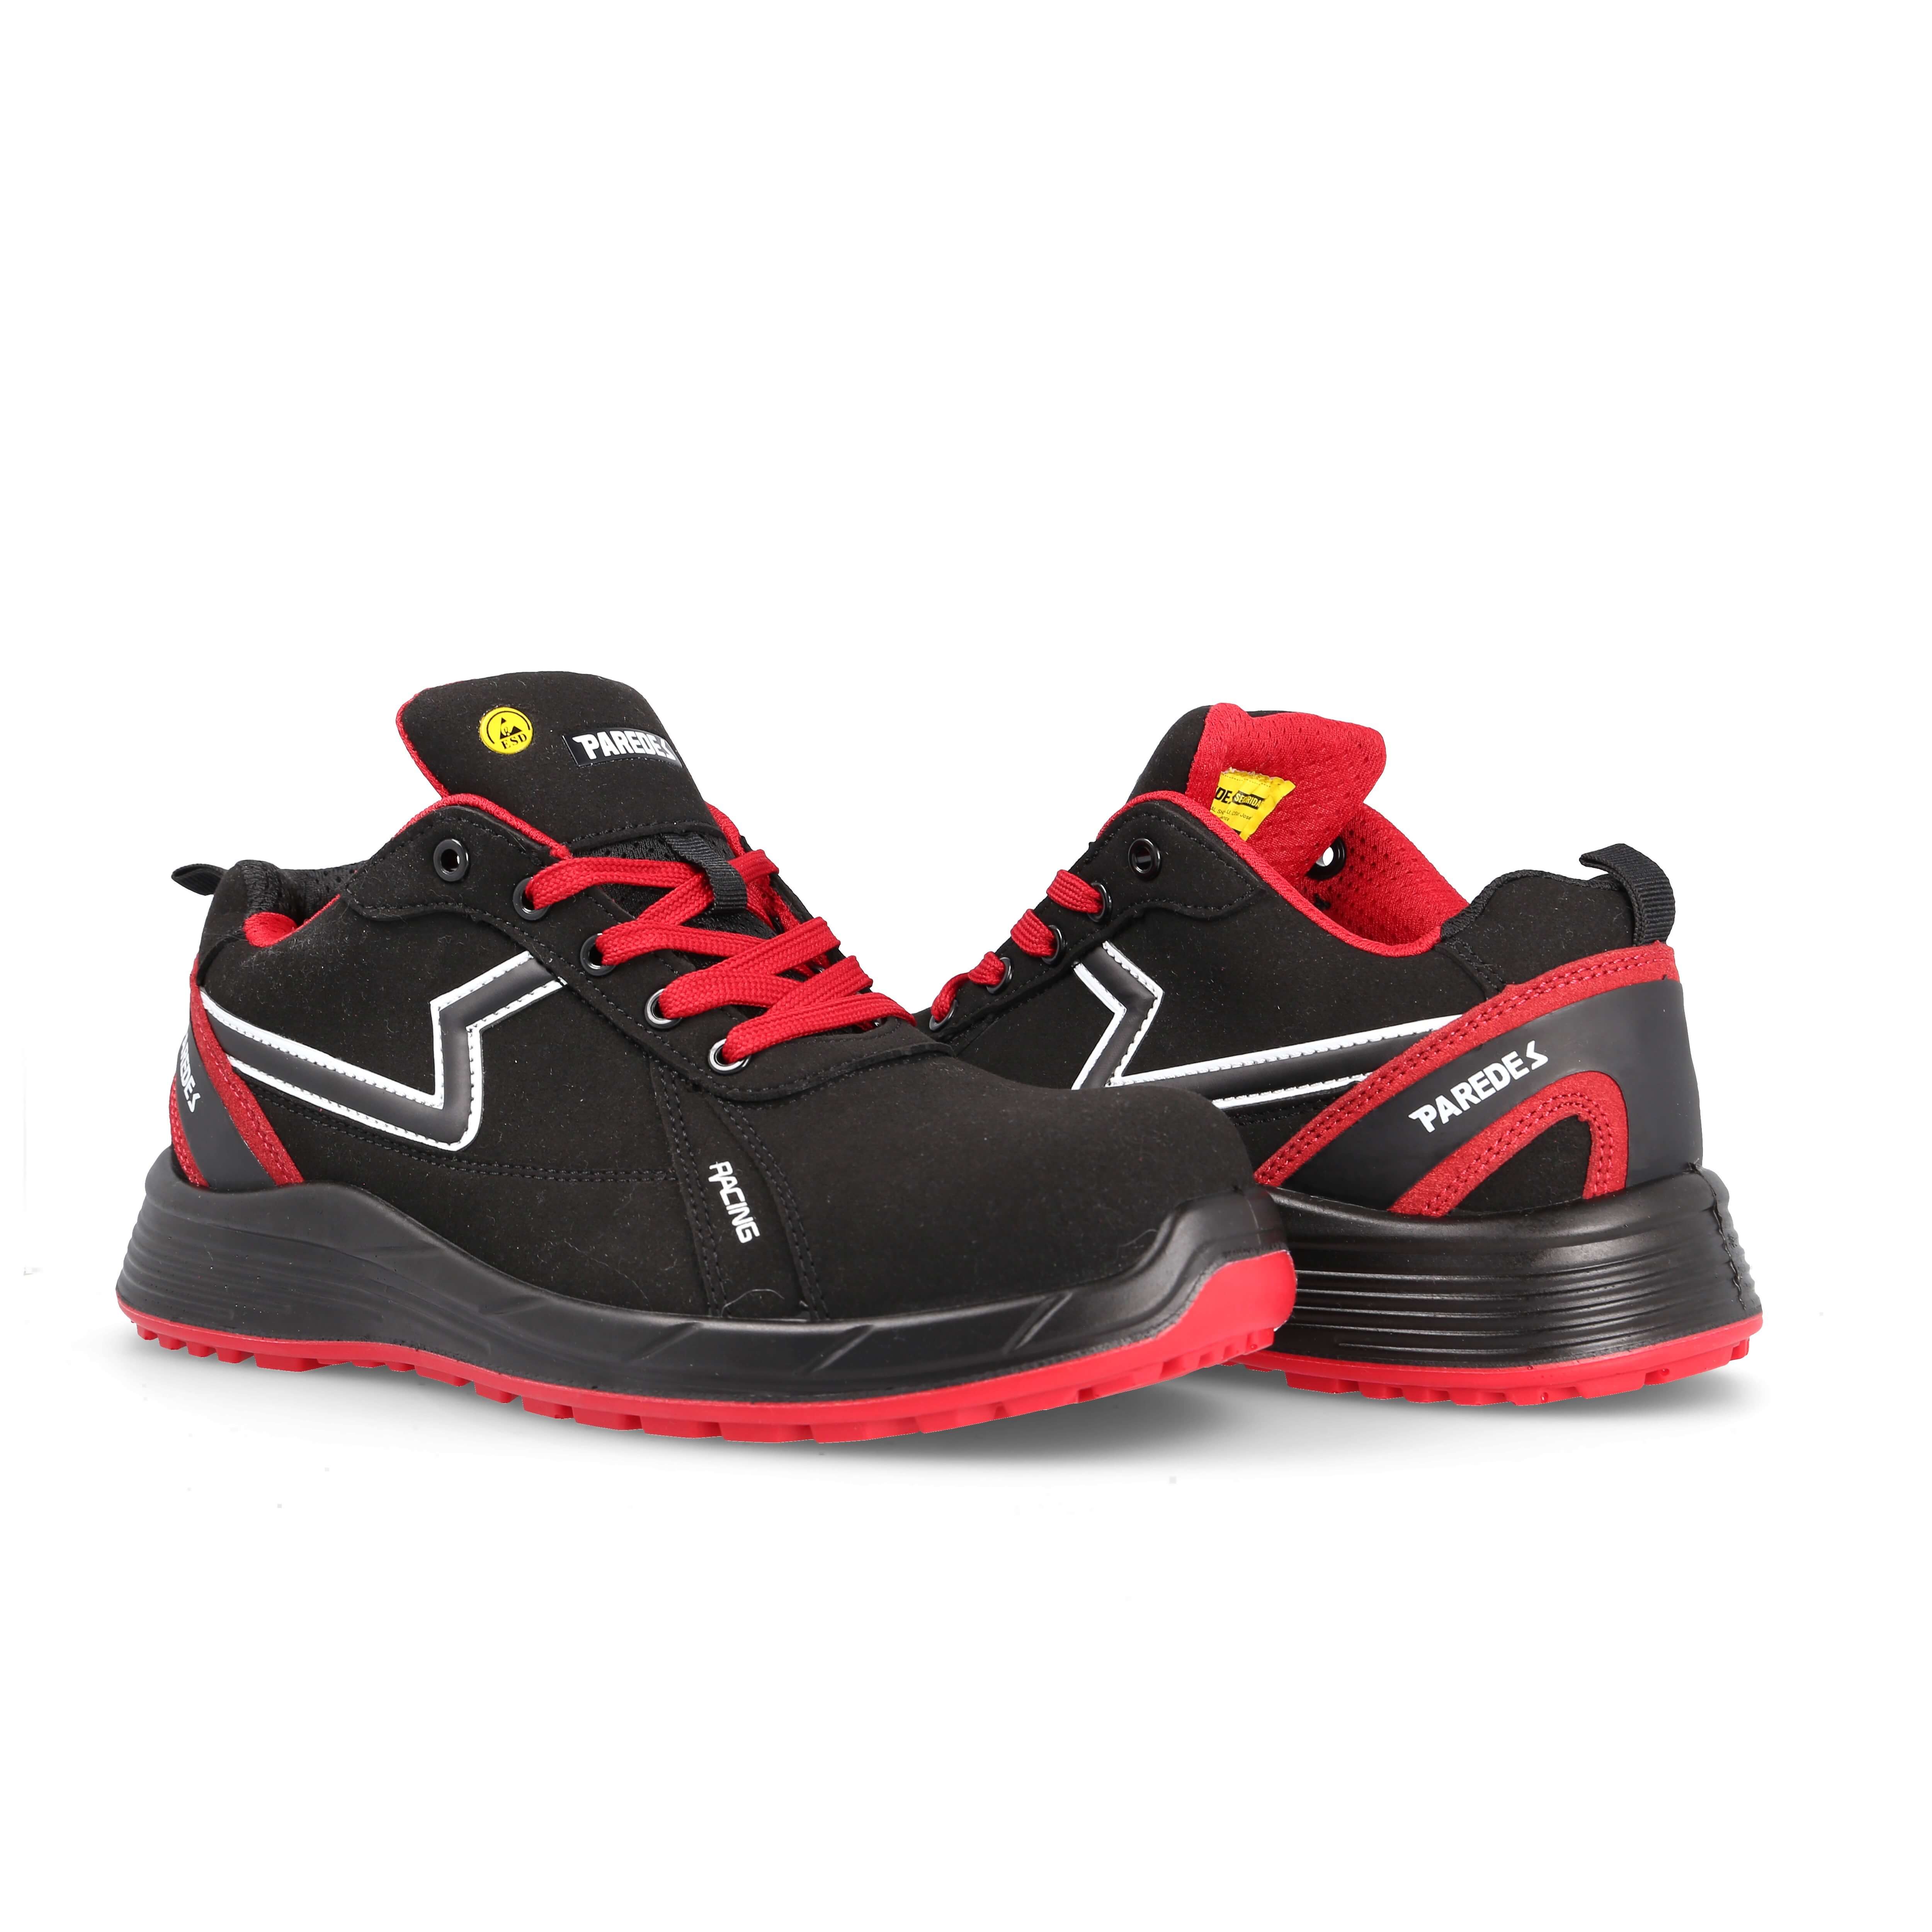 Basket securite racing sportwork Alonso S3 SRC Paredes rouge - chaussures-pro.fr